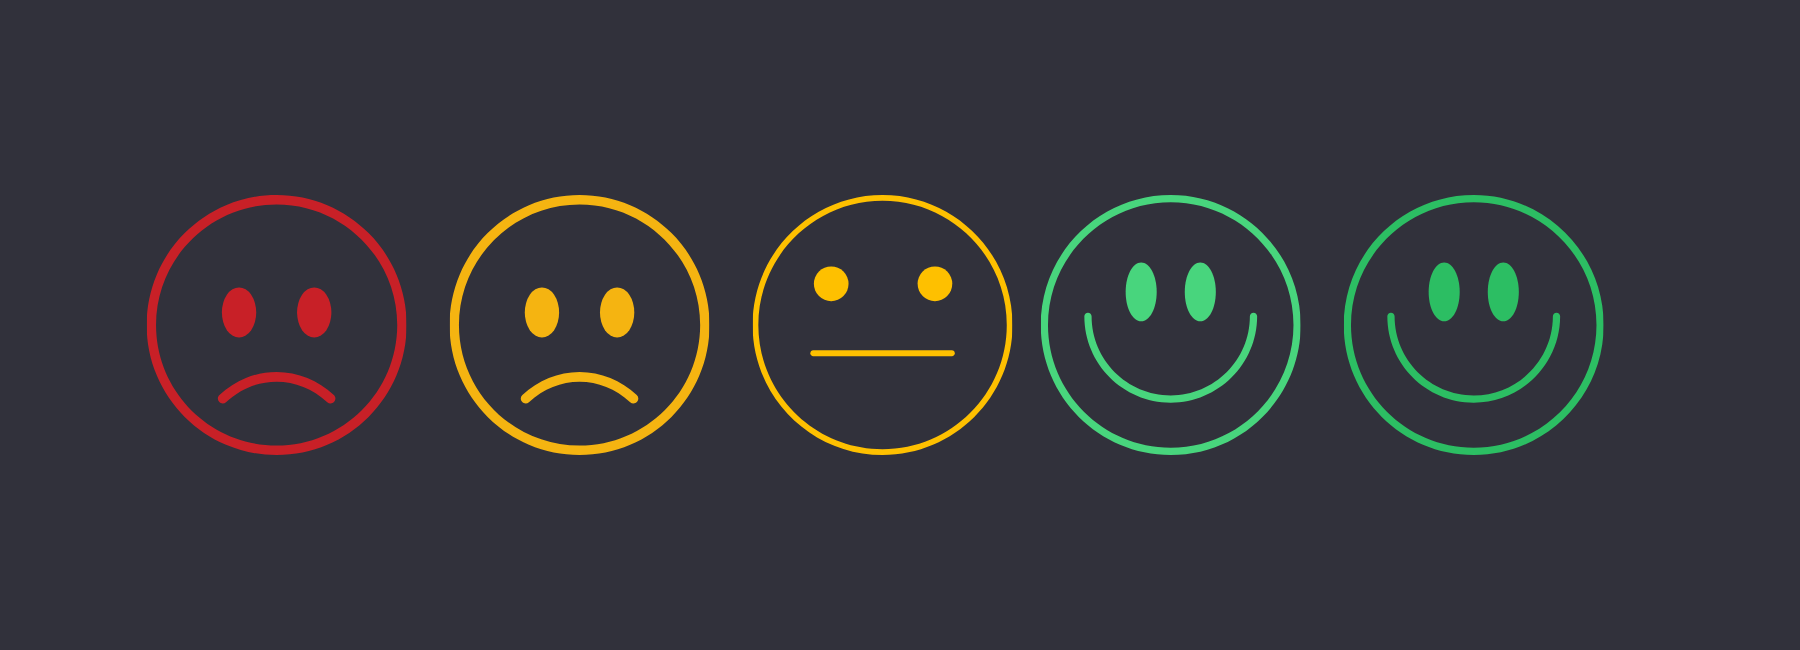 Customer Satisfaction Survey Questions & Tips